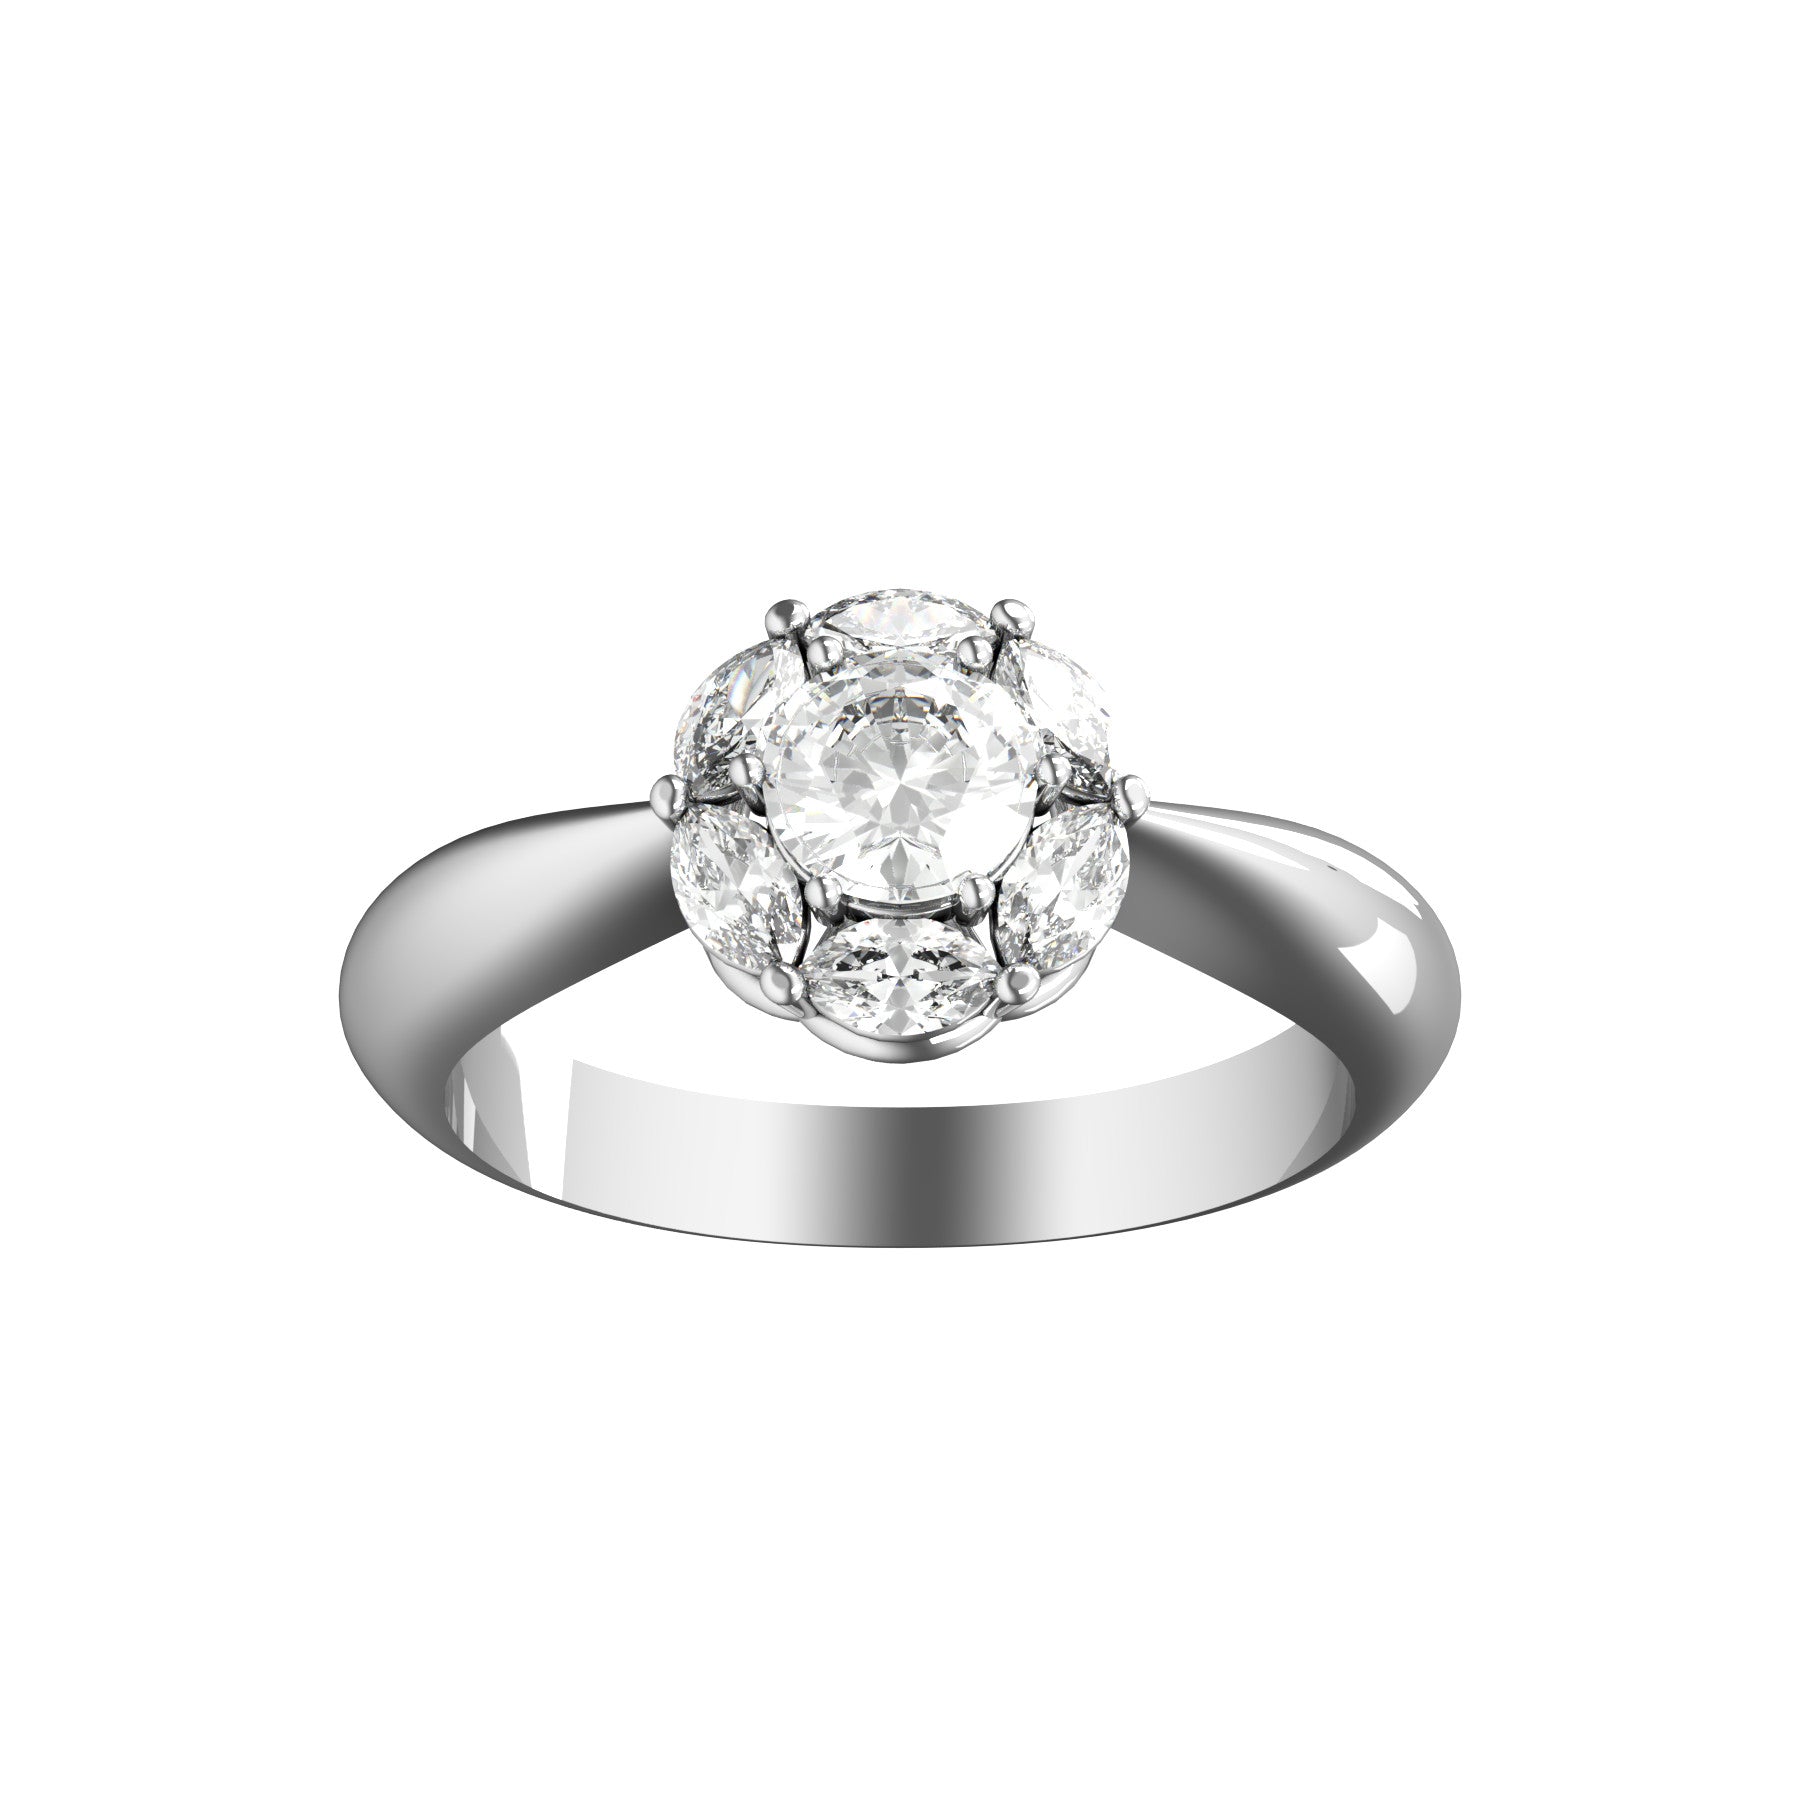 deep love engagement ring, 18 K white gold, 0,30 ct round natural diamond, navette natural diamonds, weight about 3,5 g. (0.12 oz), width 7,8 mm max